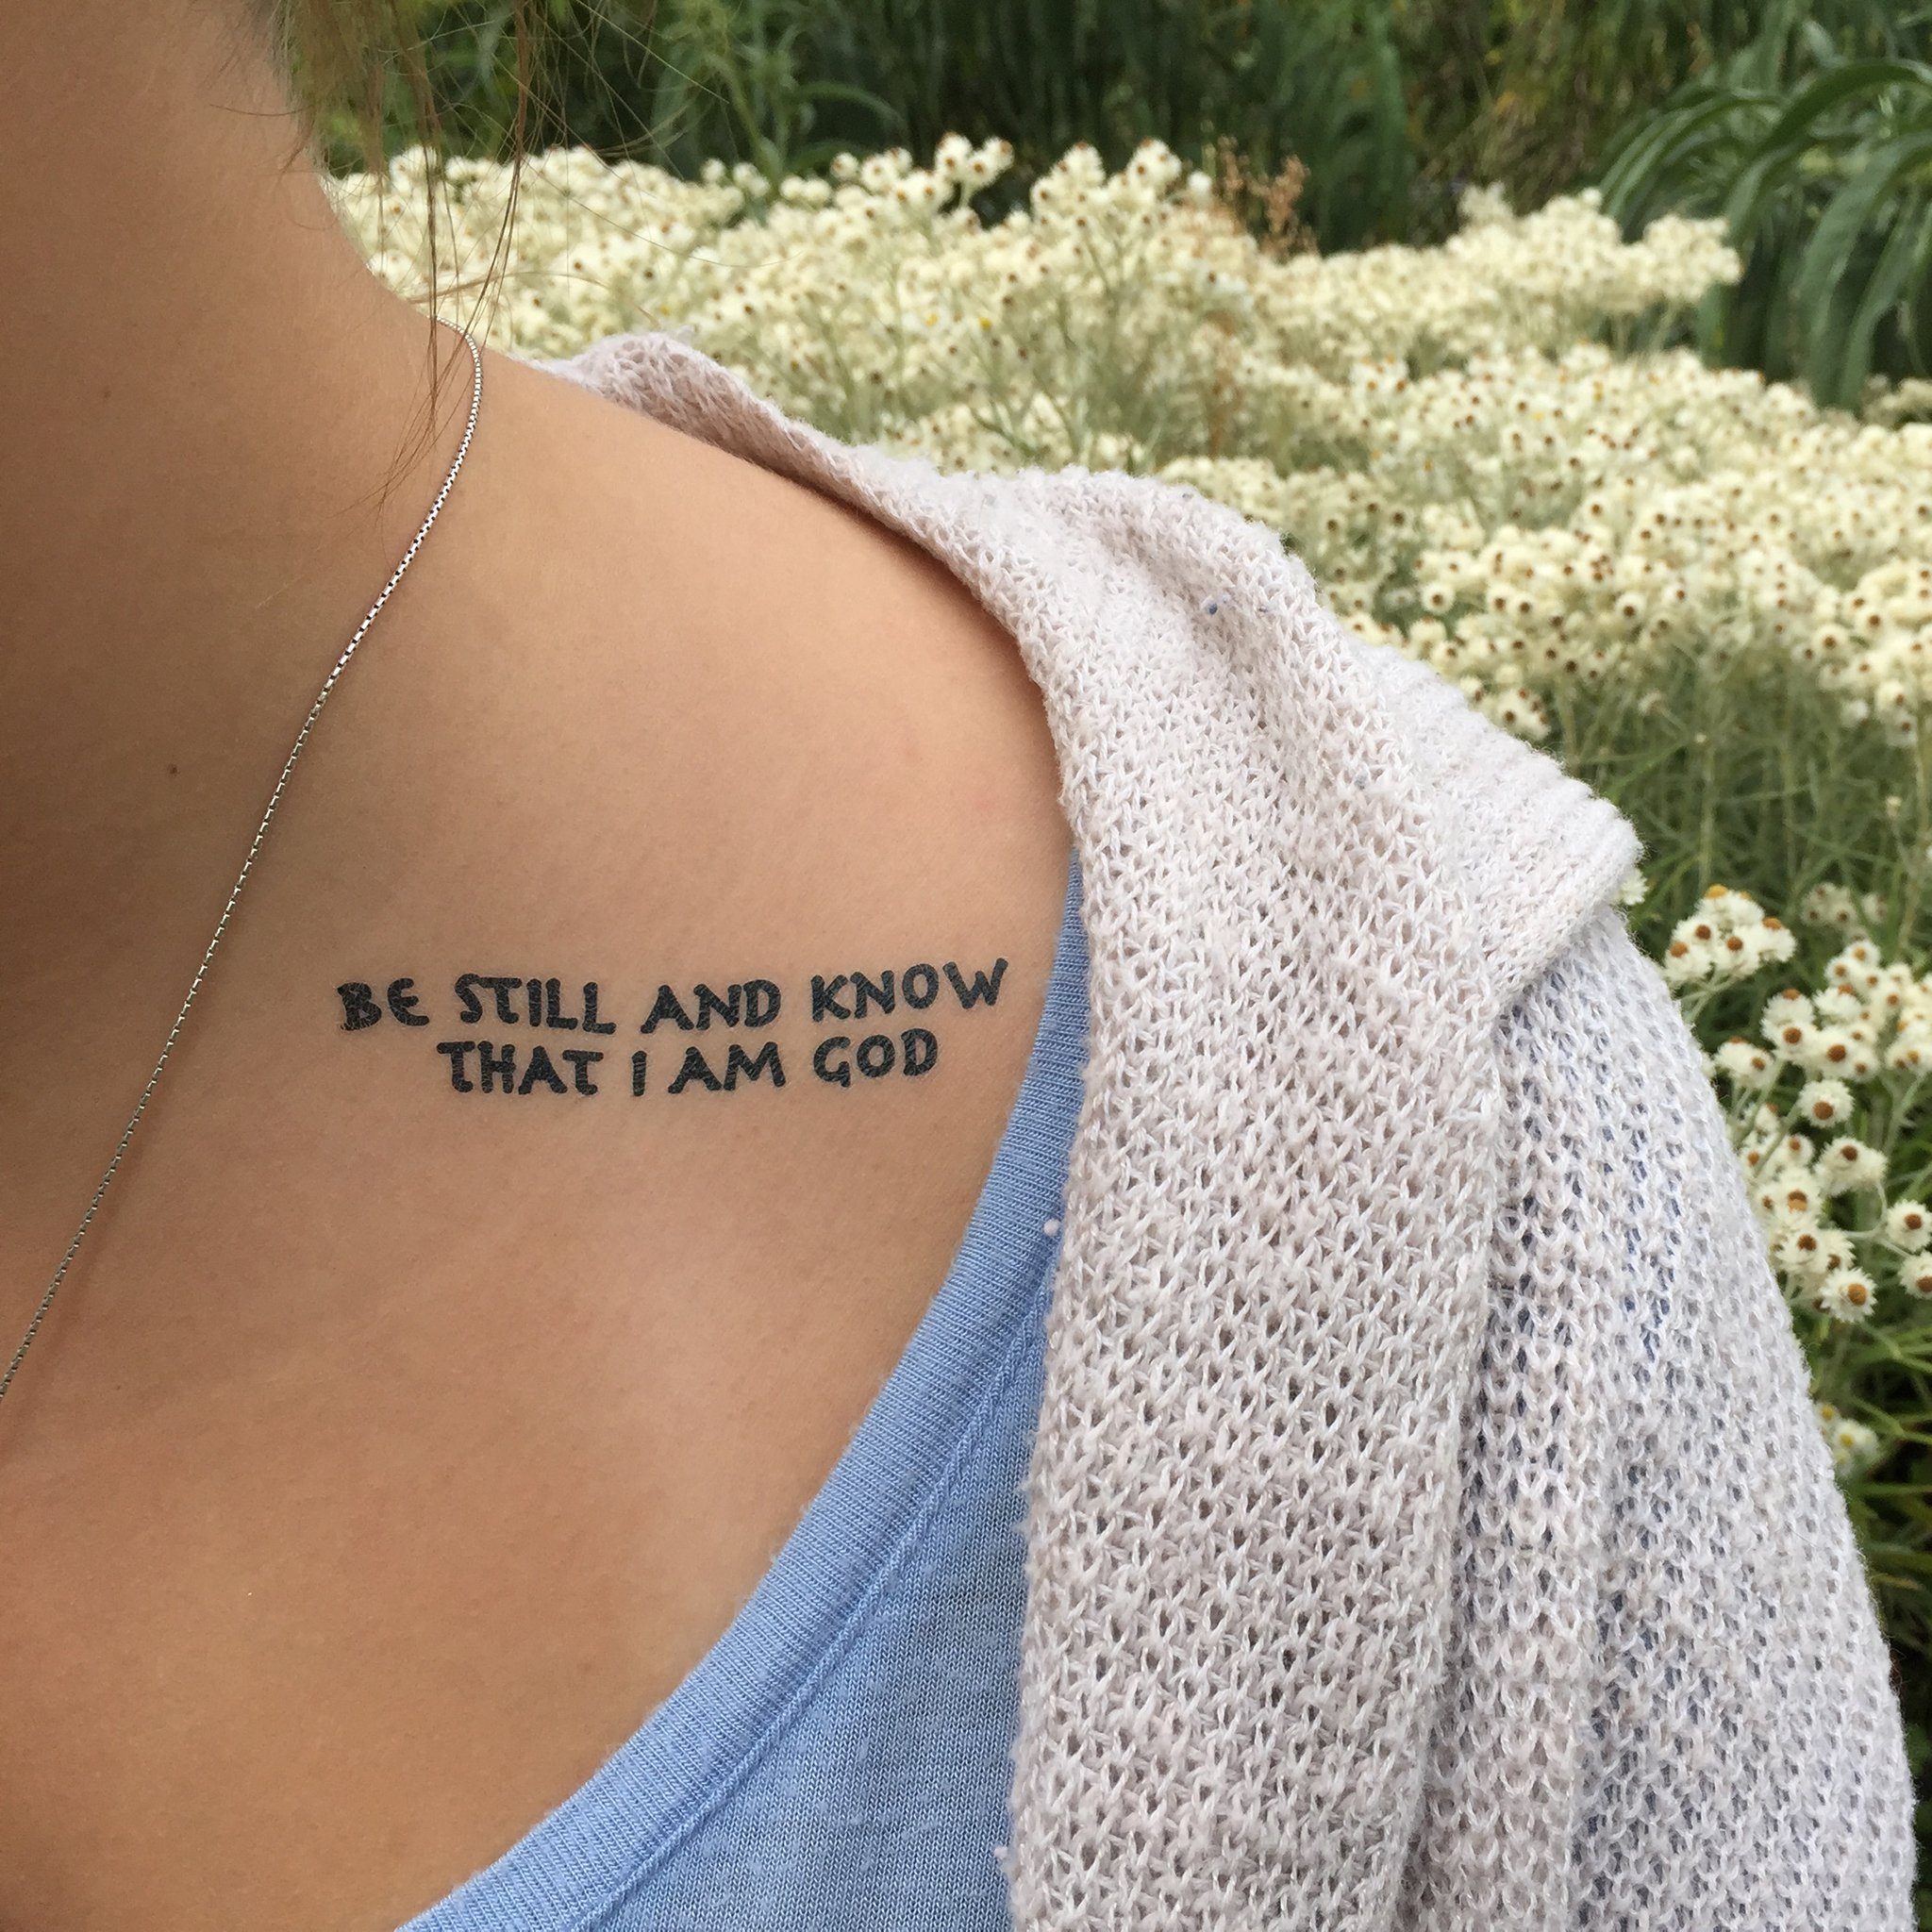 This Too Shall Pass small Manifestation Tattoo  Conscious Ink